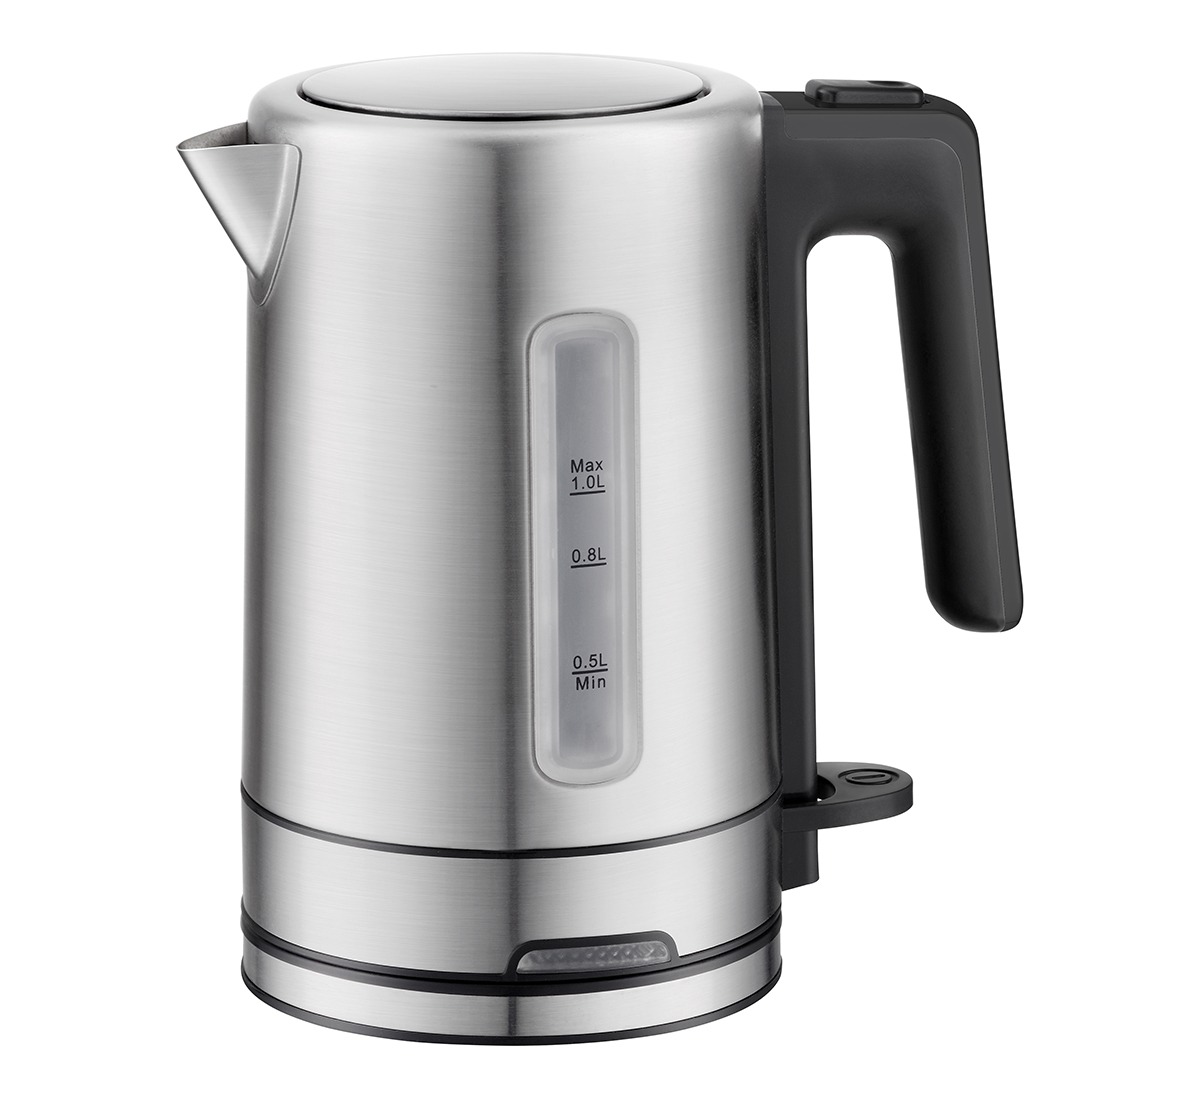 1ltr Silver Stainless Steel Electric Kettle

